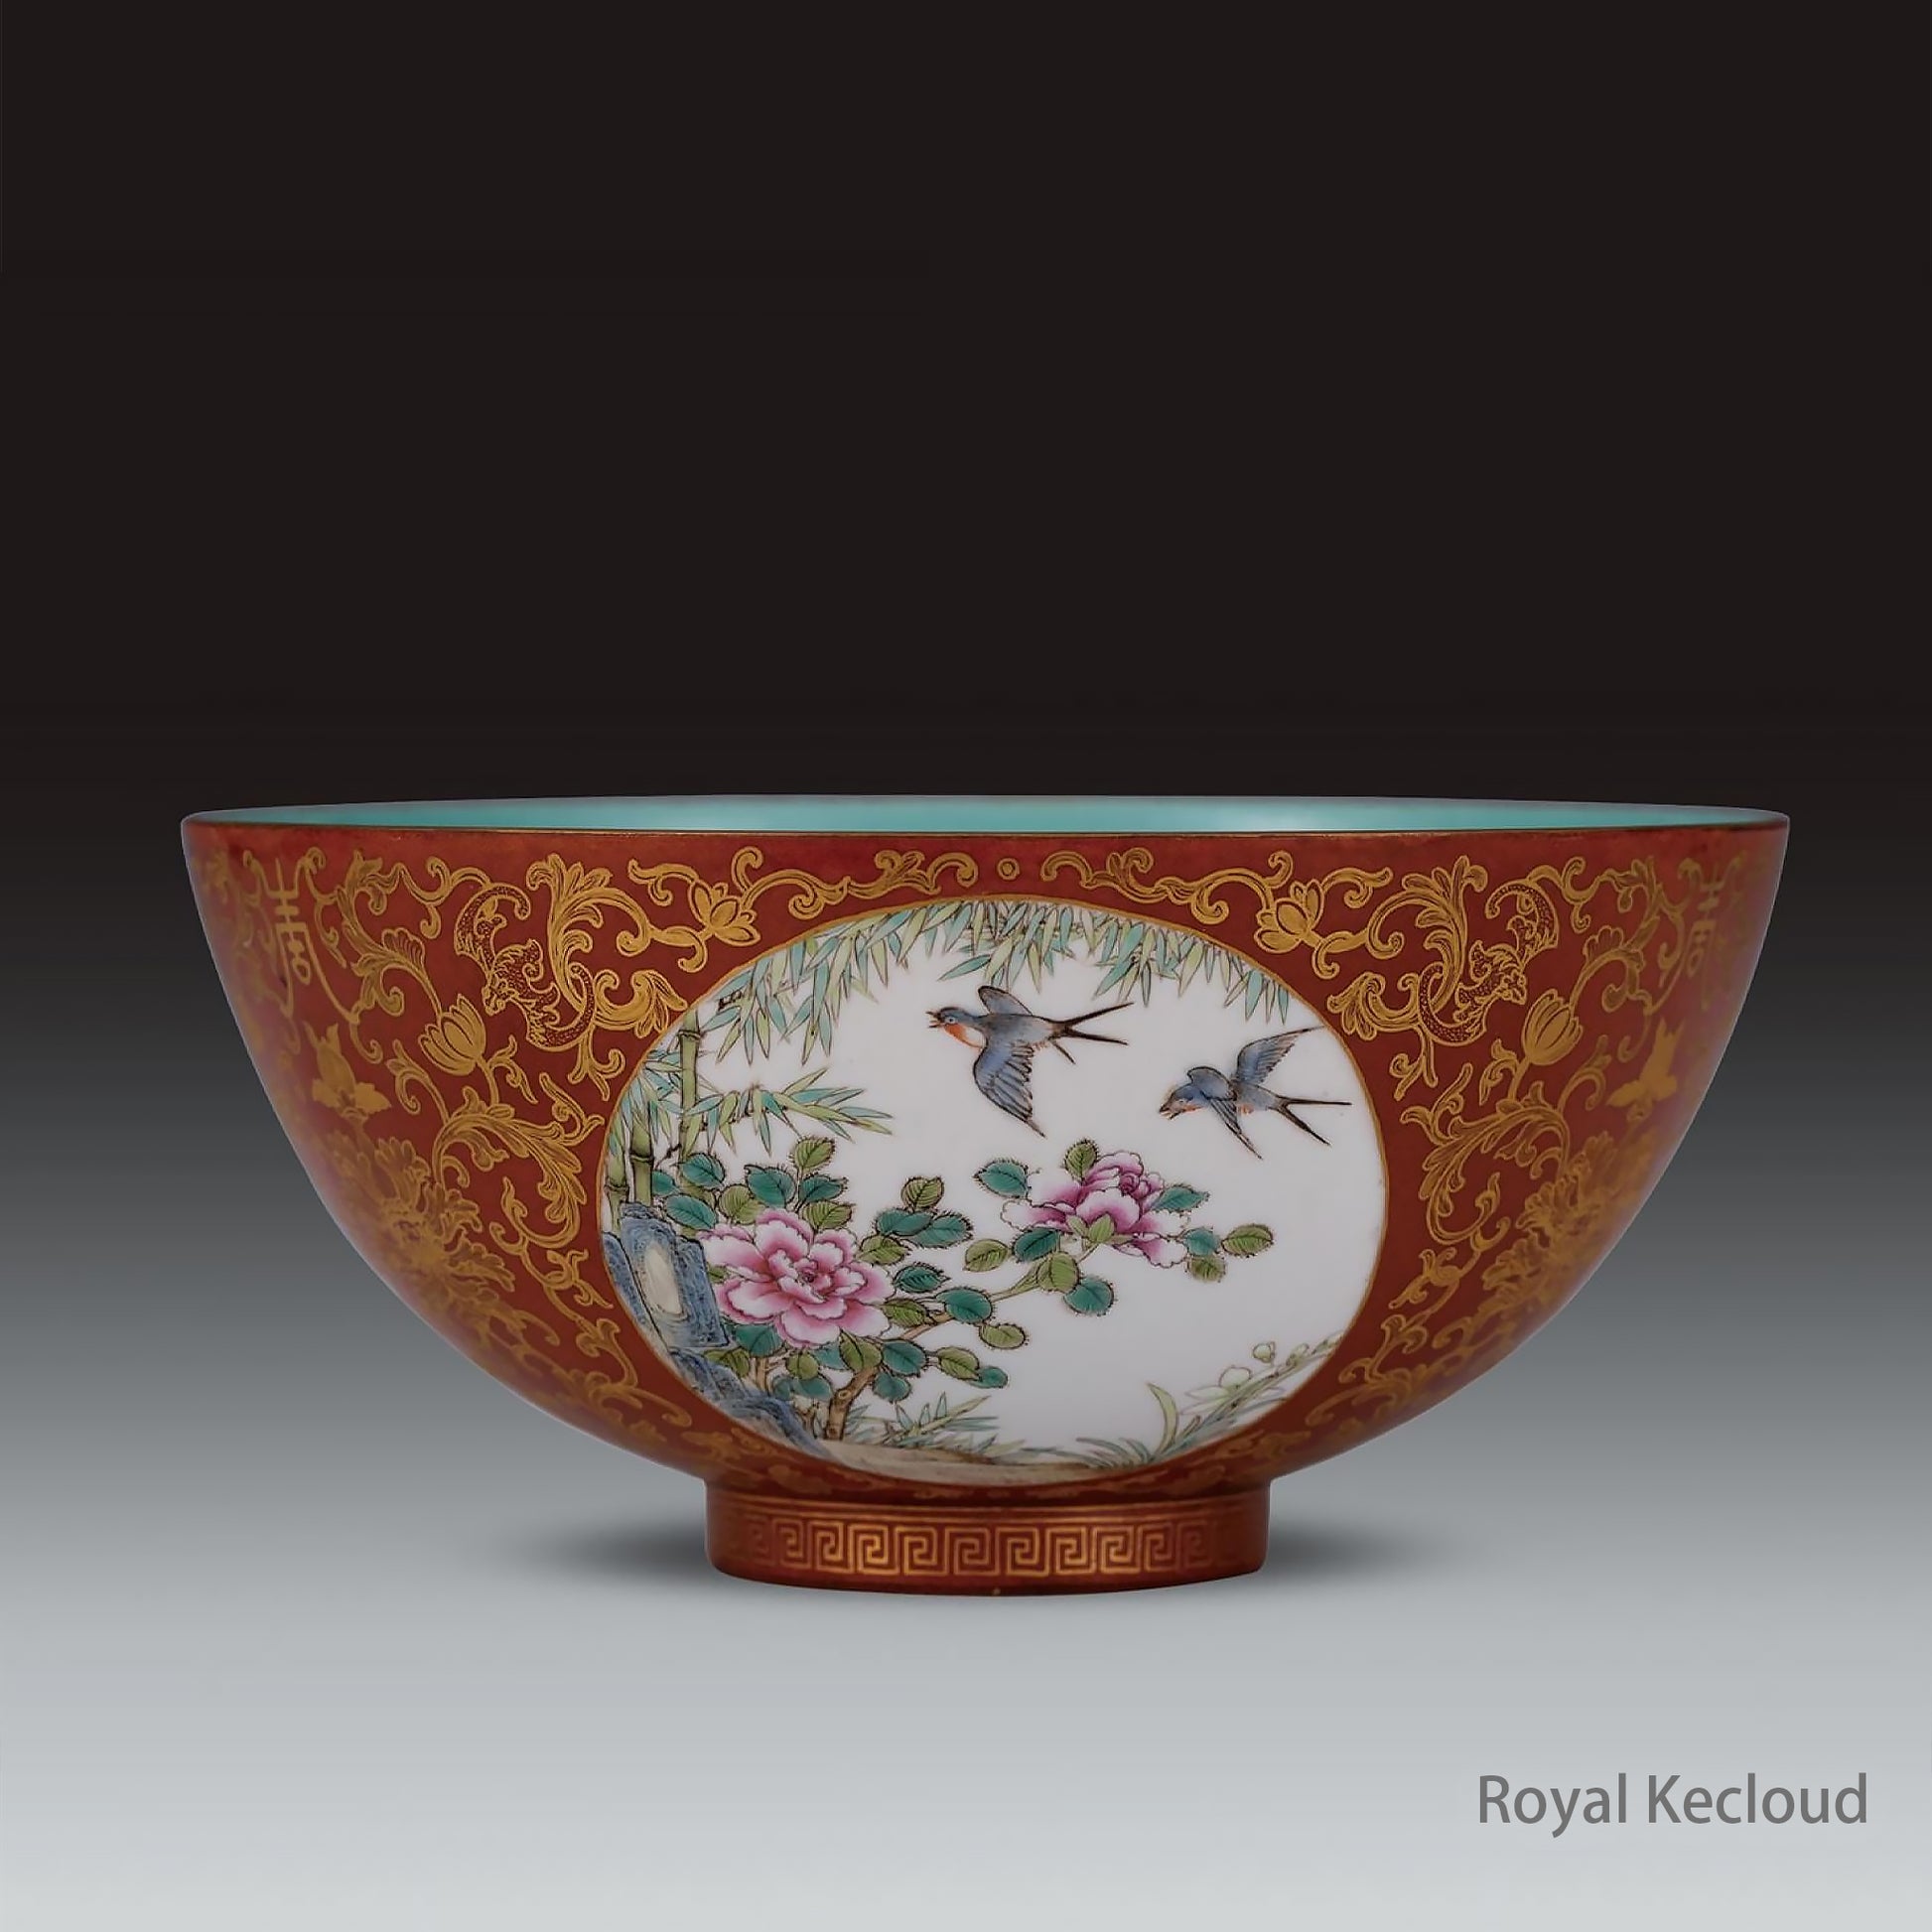 Chinese Ancient Royal Qing Dynasty Coral-ground Gilt-decorated 'Birds and Flowers' Bowl. Emperor Ceramic Antique..